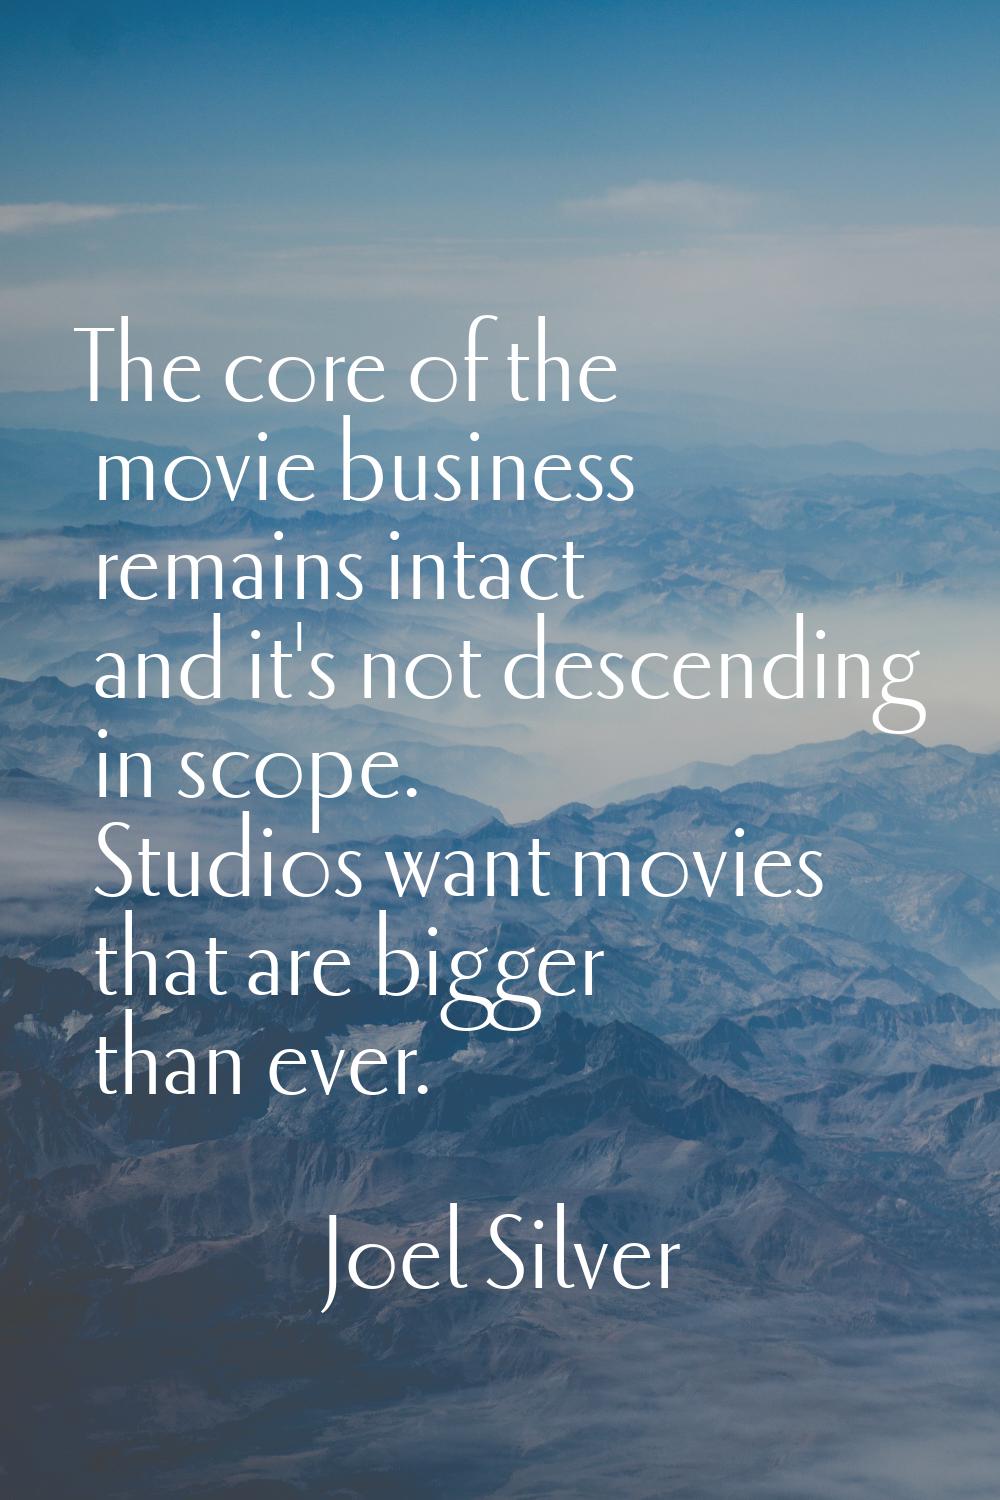 The core of the movie business remains intact and it's not descending in scope. Studios want movies